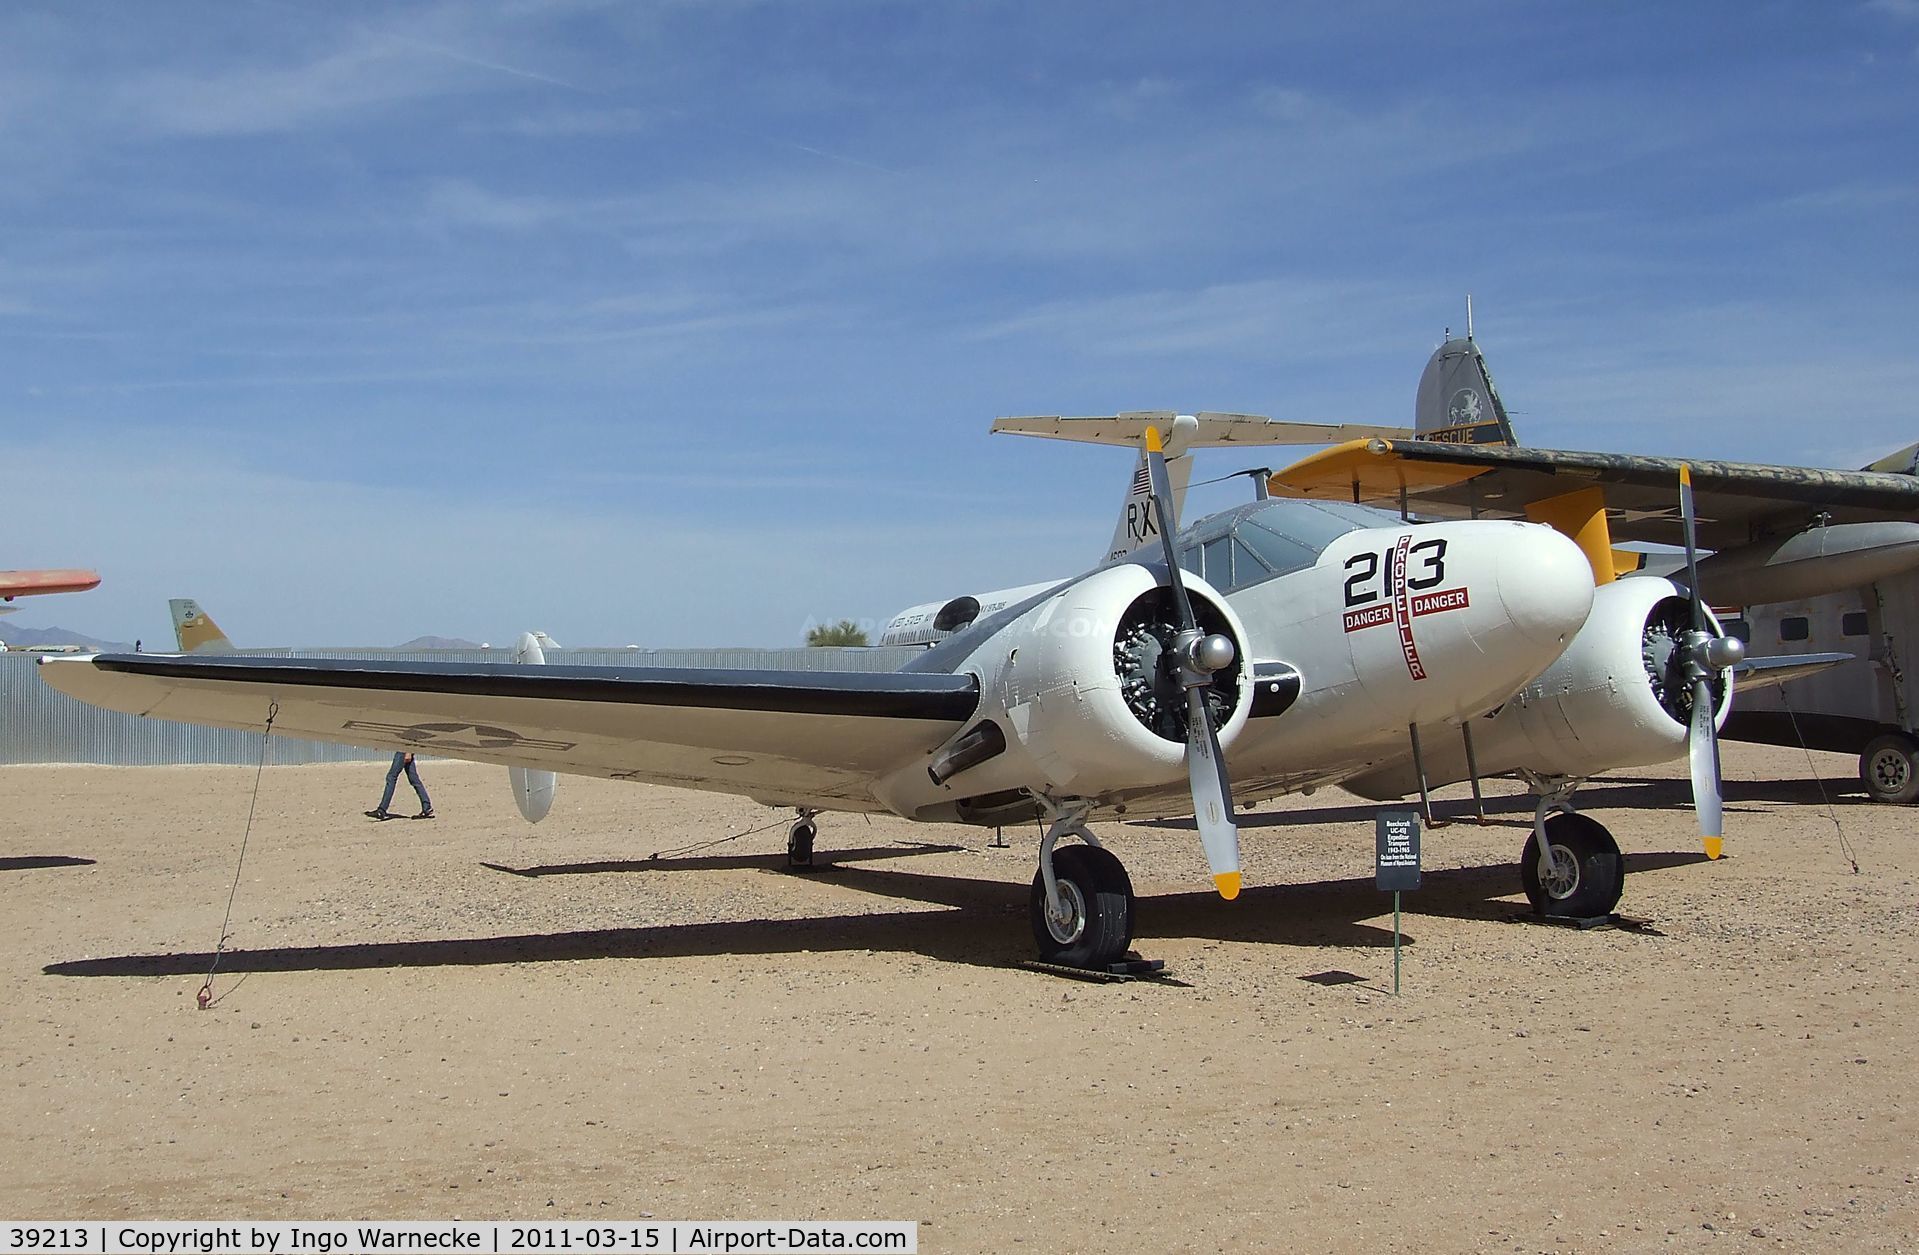 39213, Beech UC-45J Expeditor C/N 4297, Beechcraft UC-45J Expeditor at the Pima Air & Space Museum, Tucson AZ